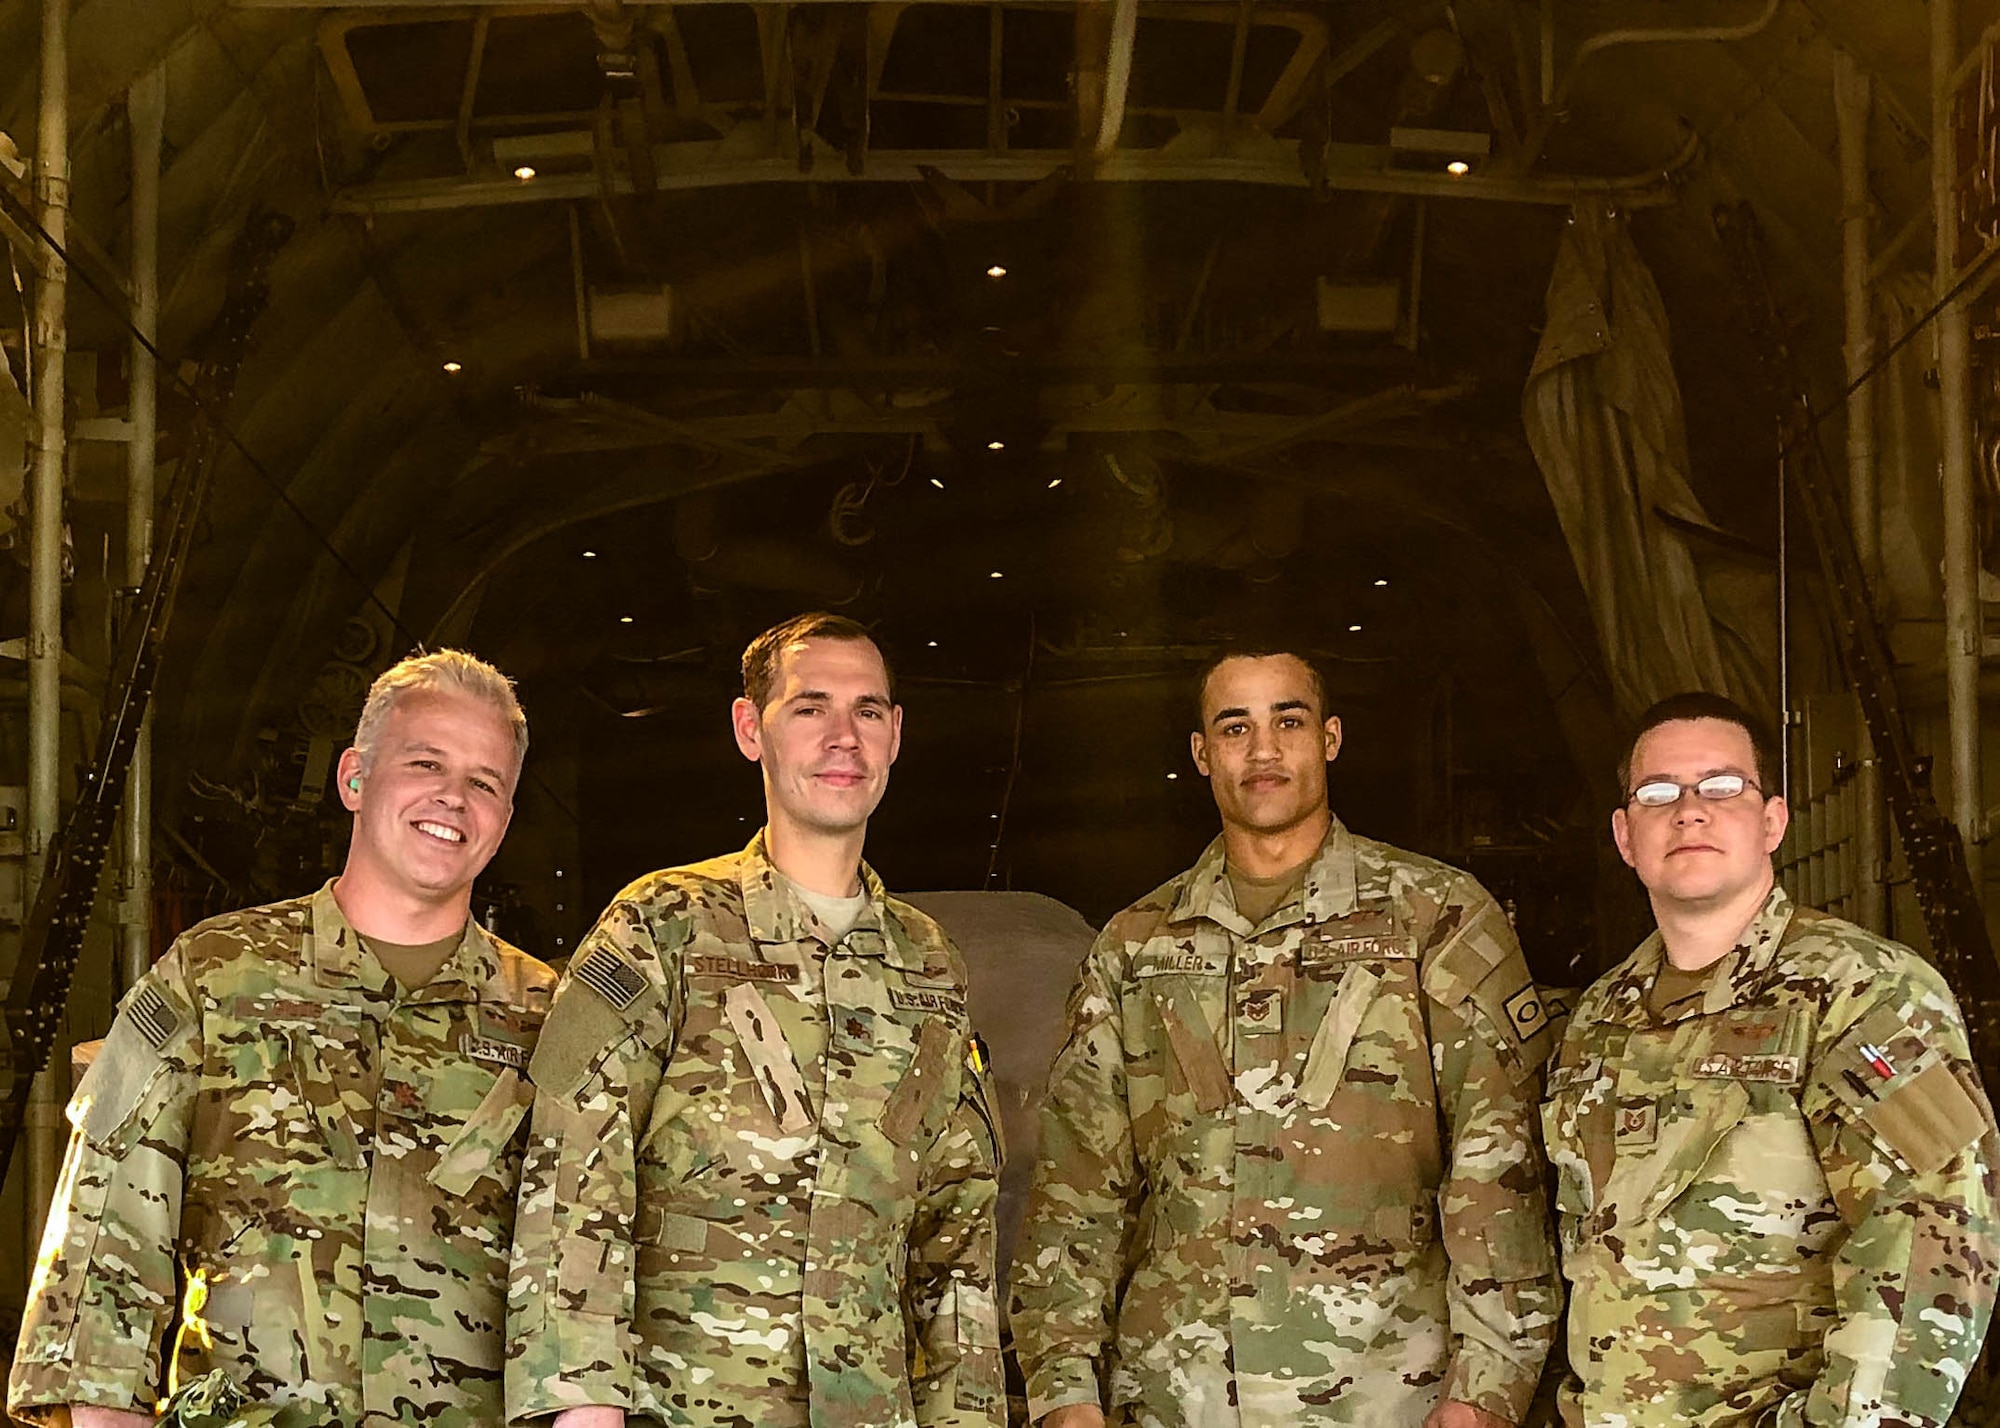 Maj. Andrew Gillis (left), Maj. Ryan Stellhorn (left center), Tech. Sgt. Anthony Miller (right center), and Tech. Sgt. Anthony Miller pose in the cargo area of a C-130J before a mission while assigned to the 746th Expeditionary Airlift Squadron in early 2019. The Air Force Reserve 913th Airlift Group recently was named the recipient of the 2019 General James H. Doolittle Trophy by Air Mobility Command. The award was established by the Air Force Historical Foundation as a way to recognize a unit that has displayed bravery, determination while accomplishing its mission under difficult conditions. (Courtesy photo)